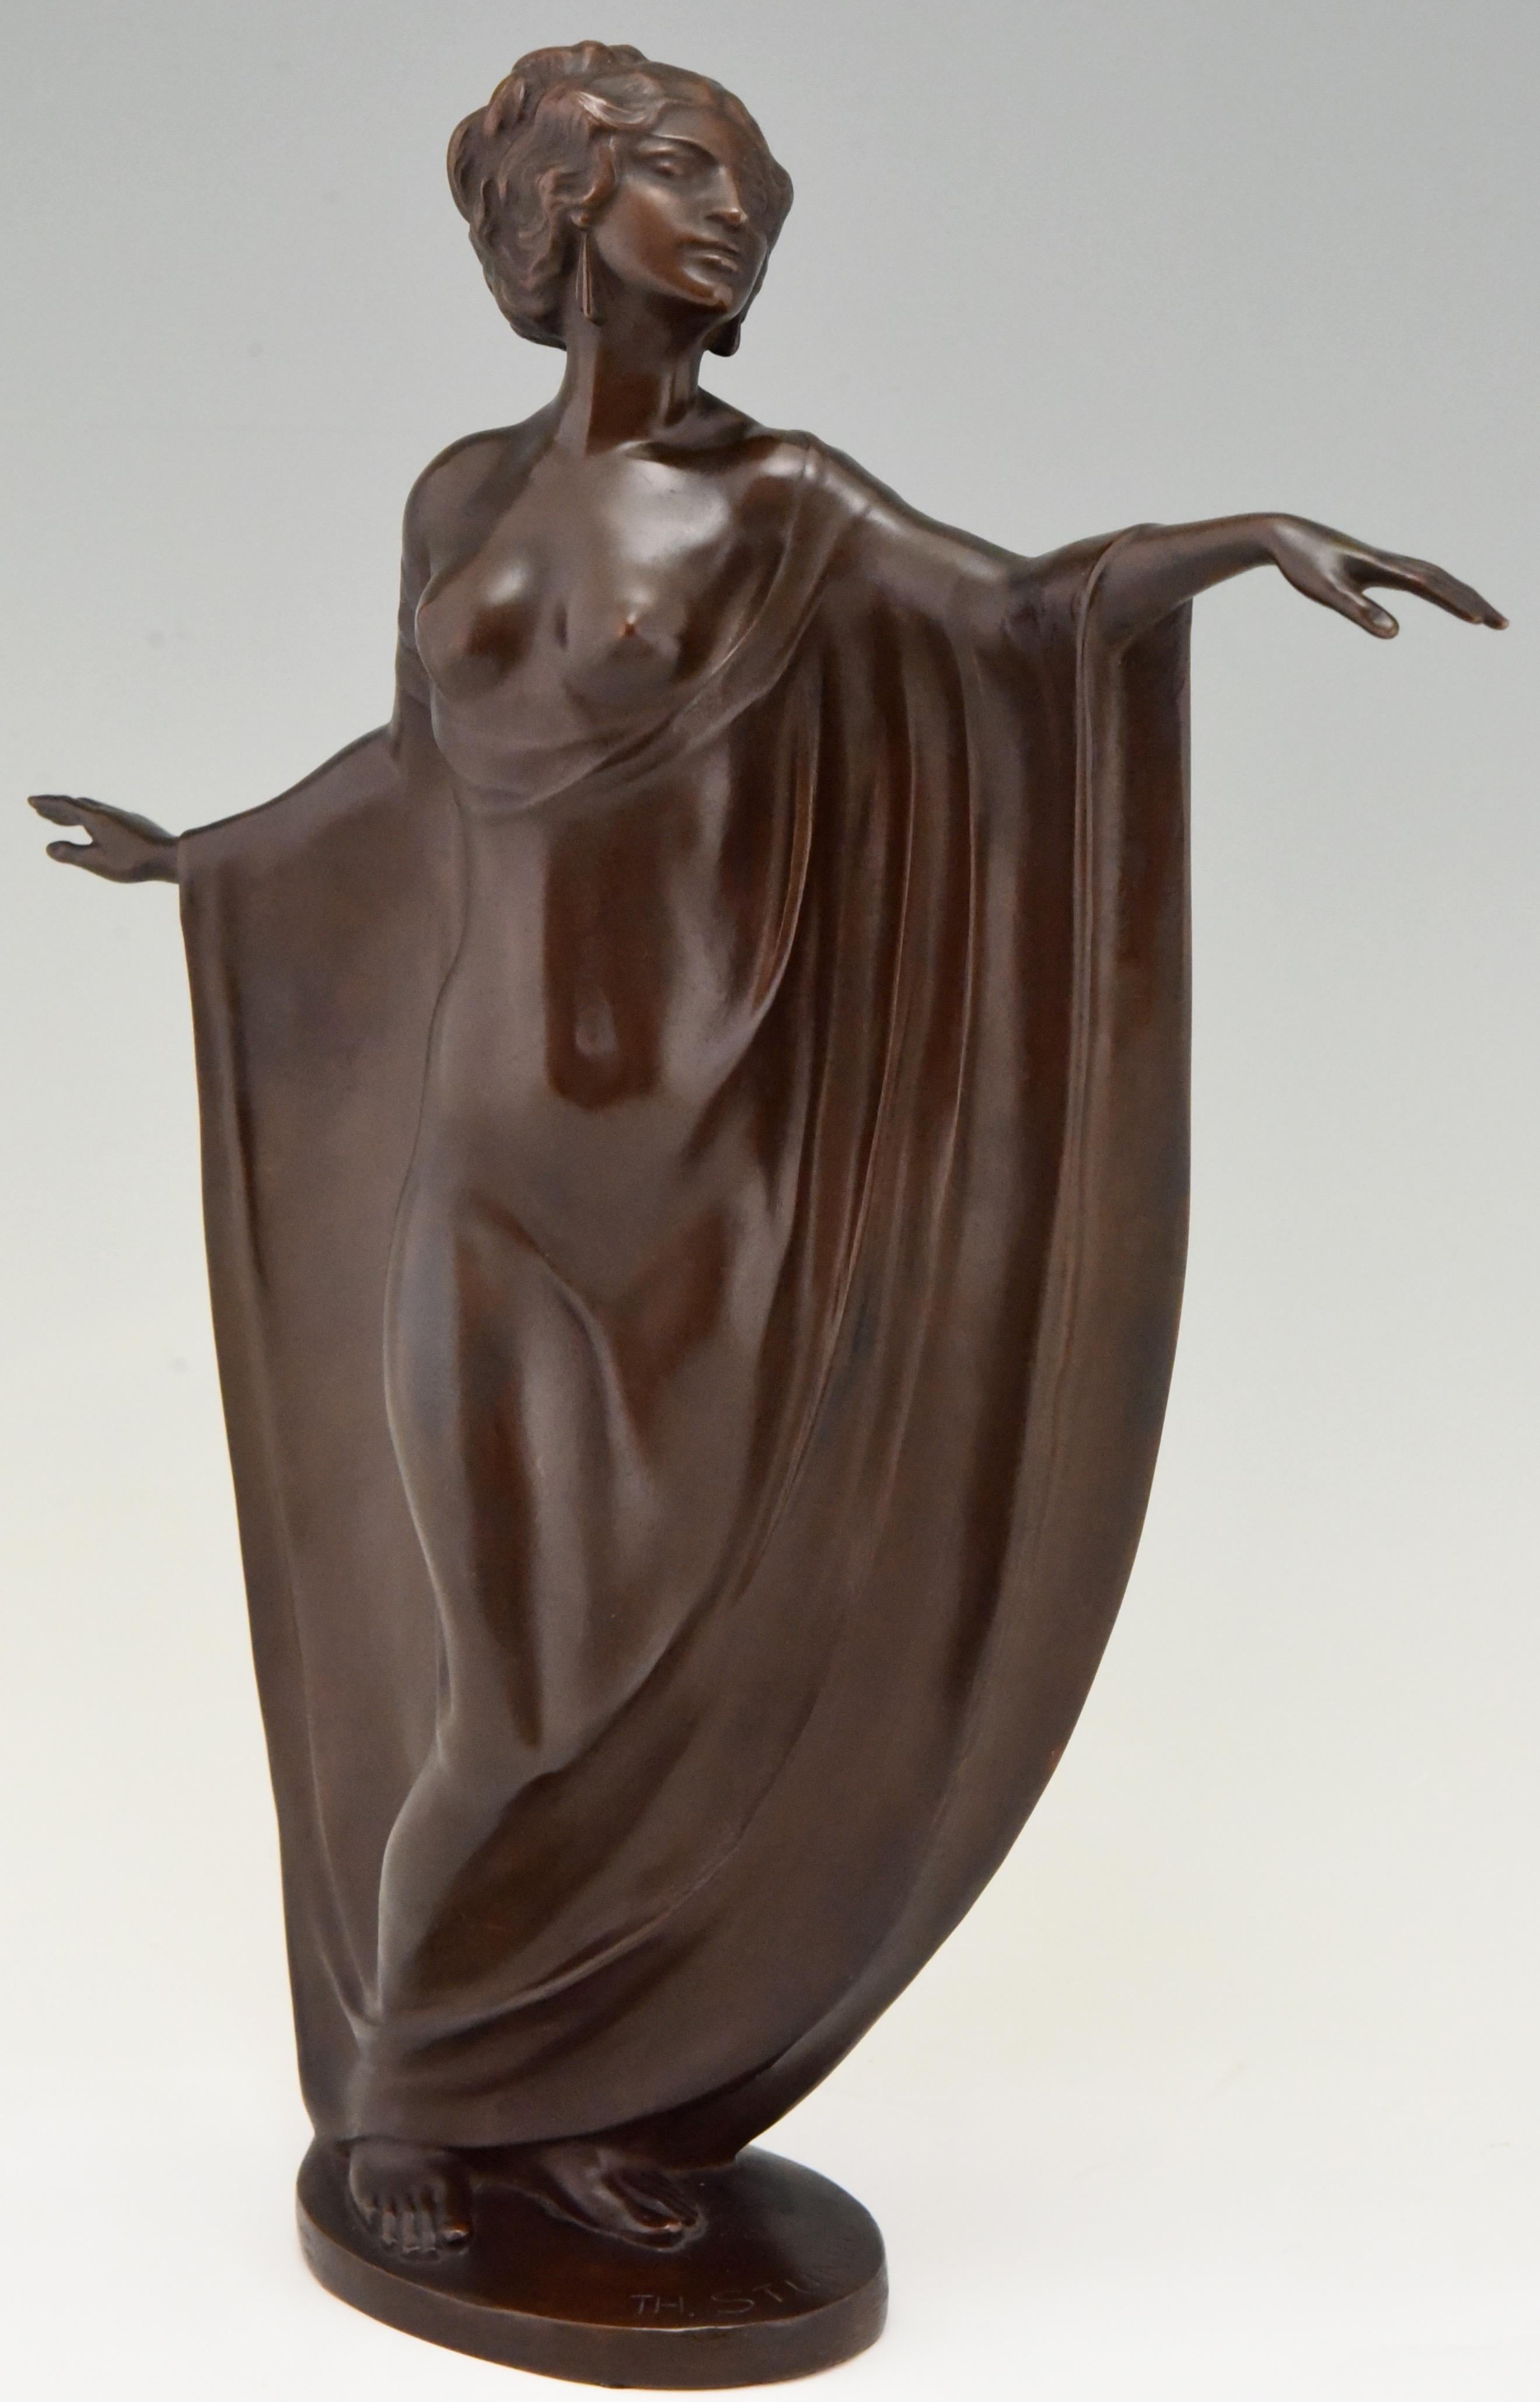 Elegant Art Nouveau bronze sculpture of a draped semi-nude dancer signed by Theodor Stundl, Austria, 1875-1934
With foundry mark.
The bronze has a beautiful rich brown patina and stands on an oval bronze base.  

A similar bronze is illustrated